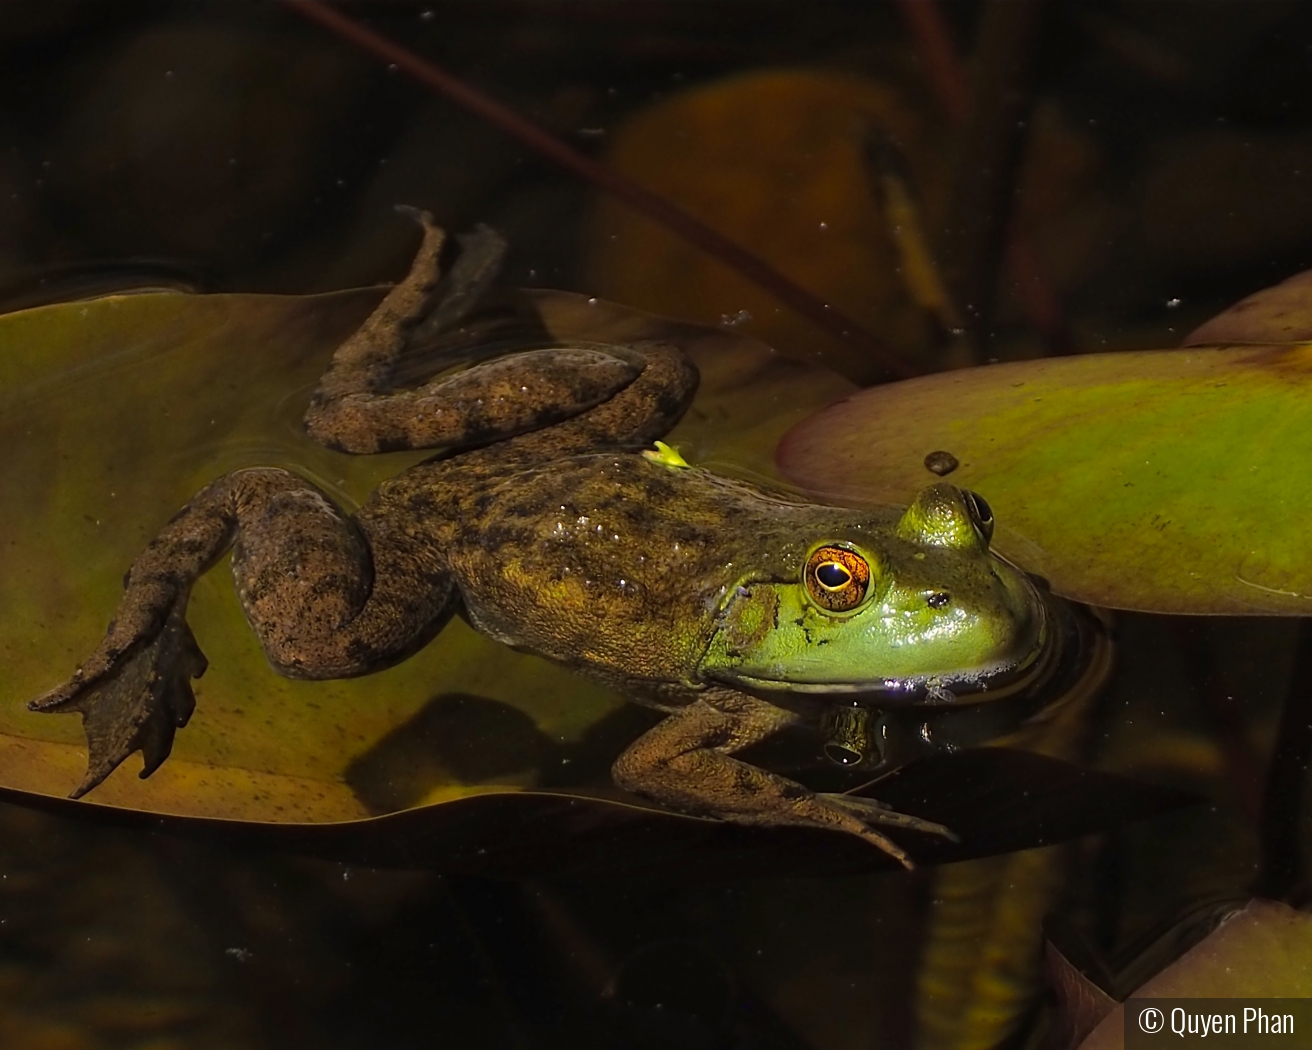 Frog in a pond by Quyen Phan